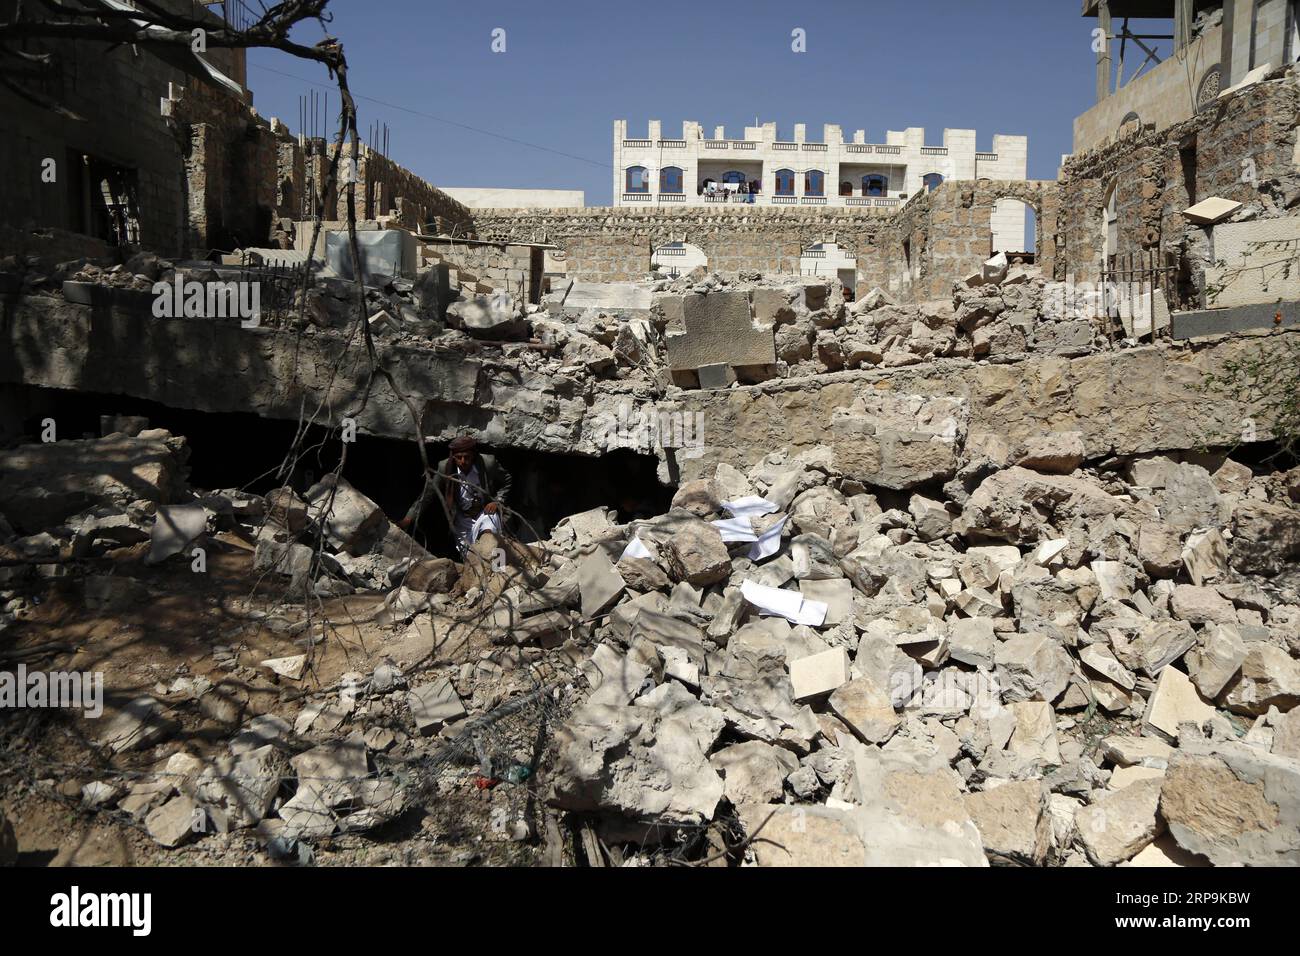 (190410) -- SANAA, April 10, 2019 -- A man inspects a house after it was hit by an airstrike in the early morning in Sanaa, Yemen, April 10, 2019. Saudi-led coalition involved in a war in Yemen struck on Wednesday two targets in Sanaa, Al Arabiya TV reported. The coalition spokesperson Turki al-Maliki said that the strikes targeted Houthi drones manufacturing plant and a store containing launch pads. There were no immediate reports of any casualties or damage. Mohammed Mohammed) YEMEN-SANAA-AIRSTRIKE nieyunpeng PUBLICATIONxNOTxINxCHN Stock Photo